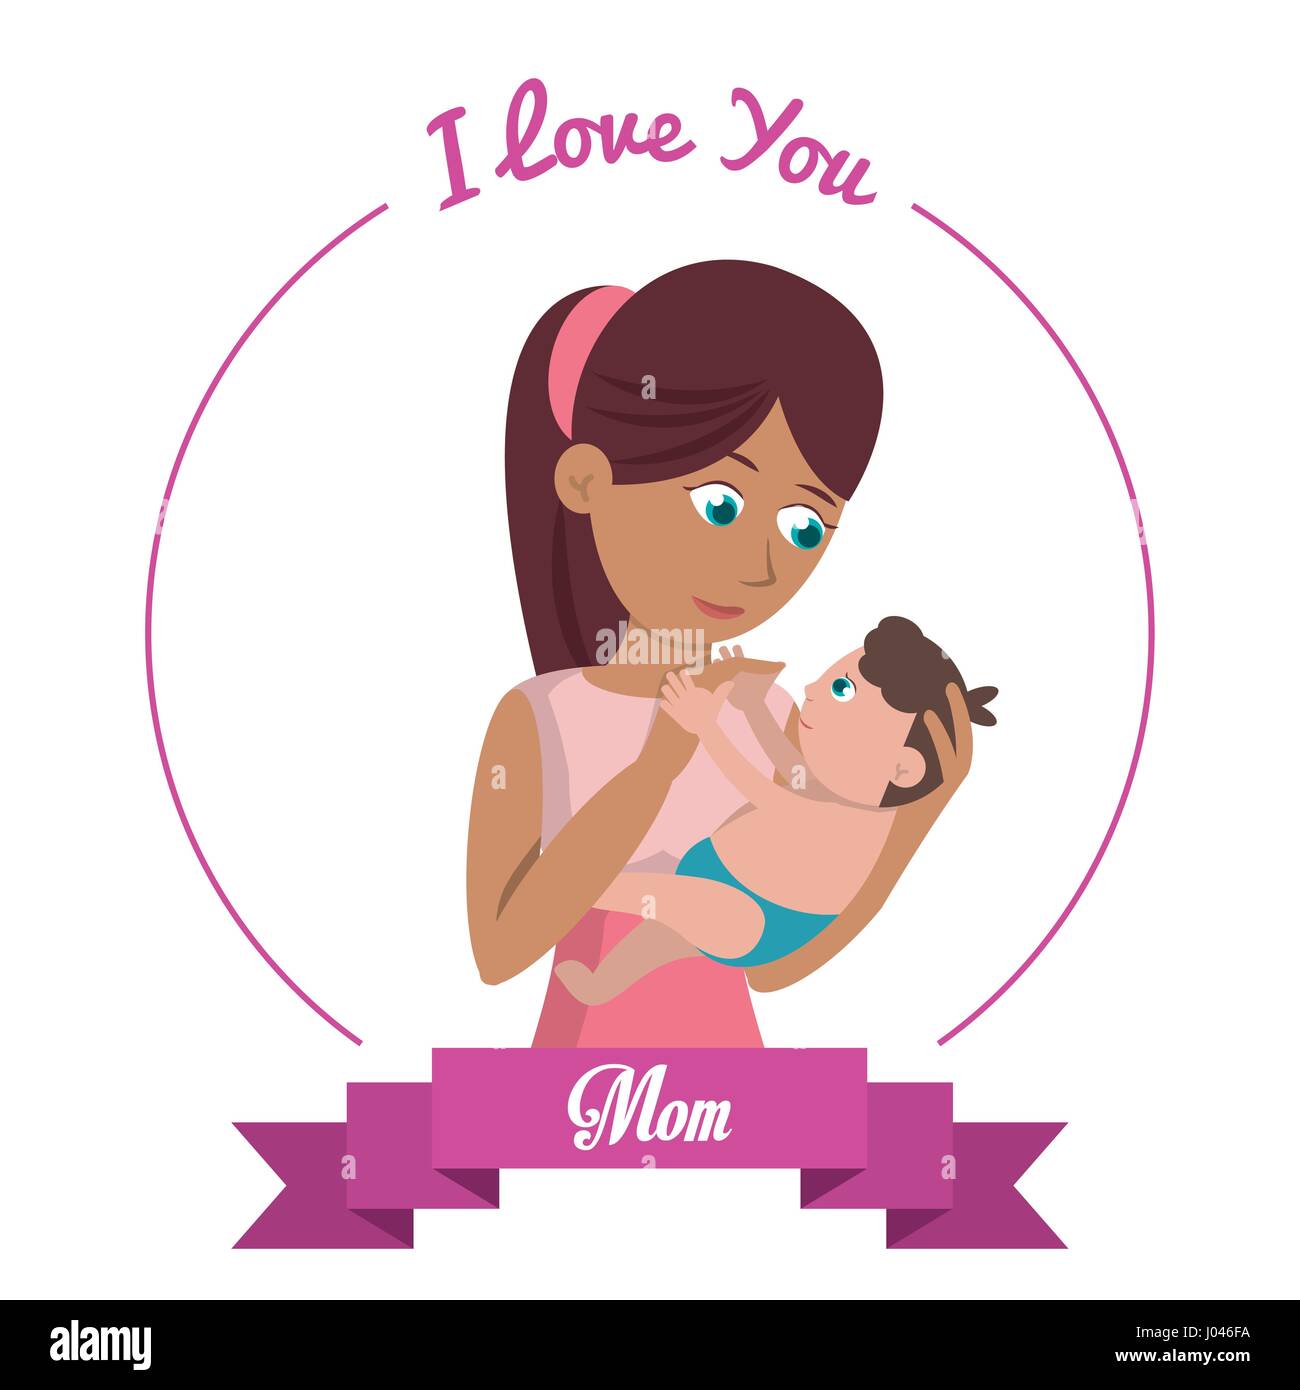 i love you mom card woman carries baby Stock Vector